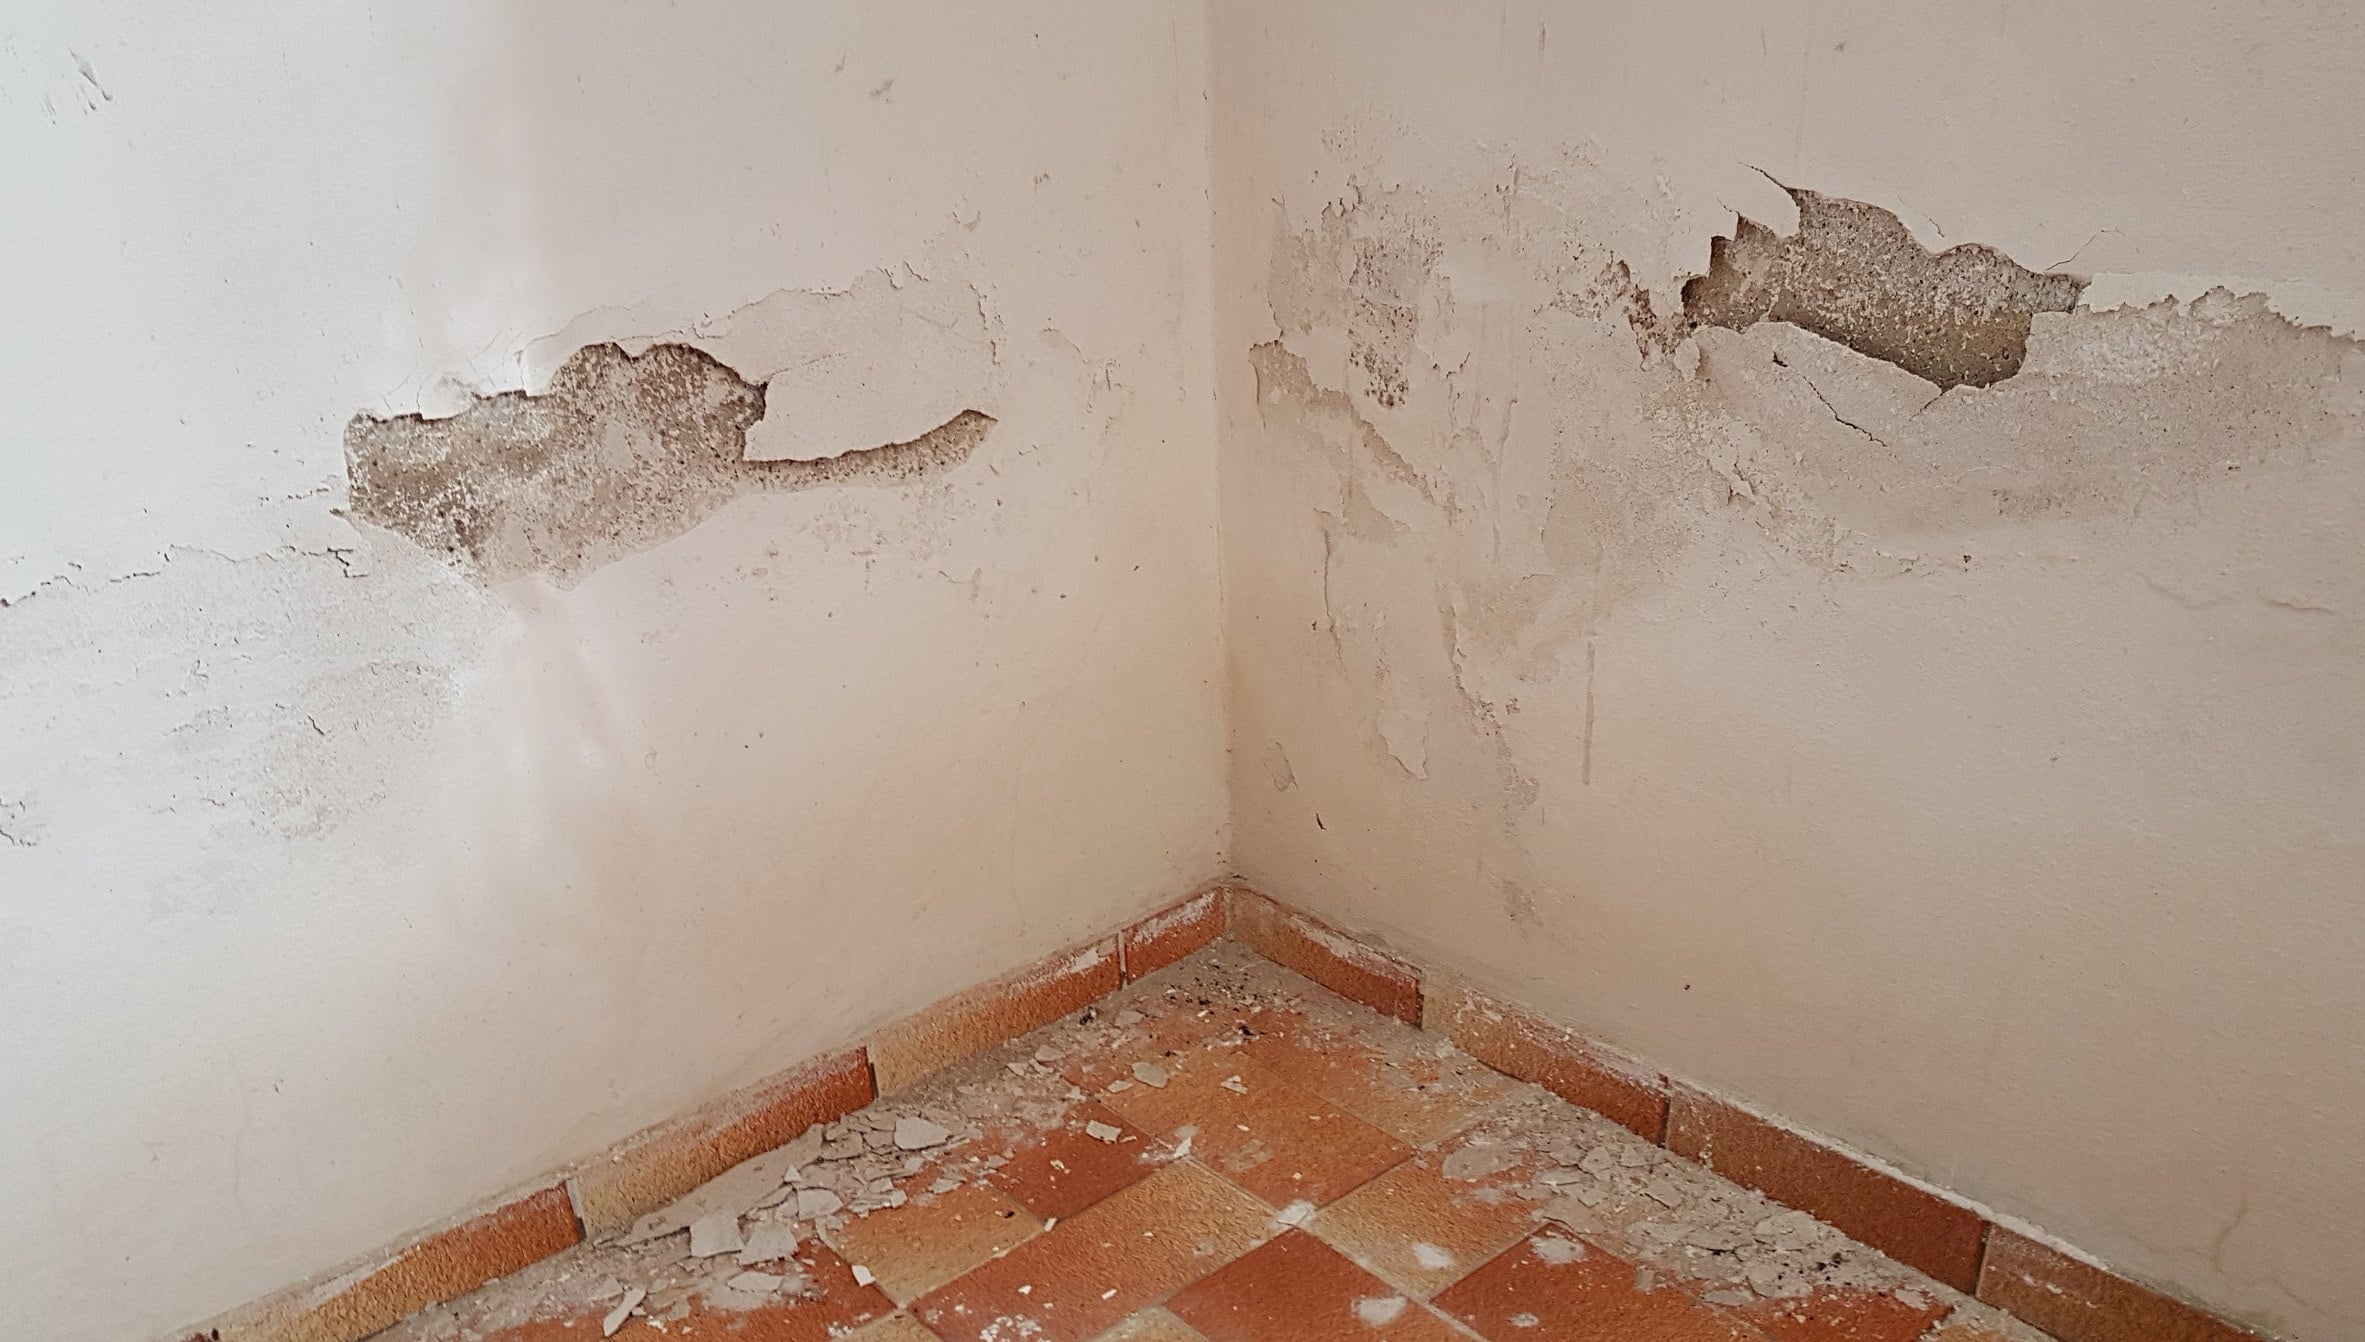 Crumbling drywall in a water damaged room